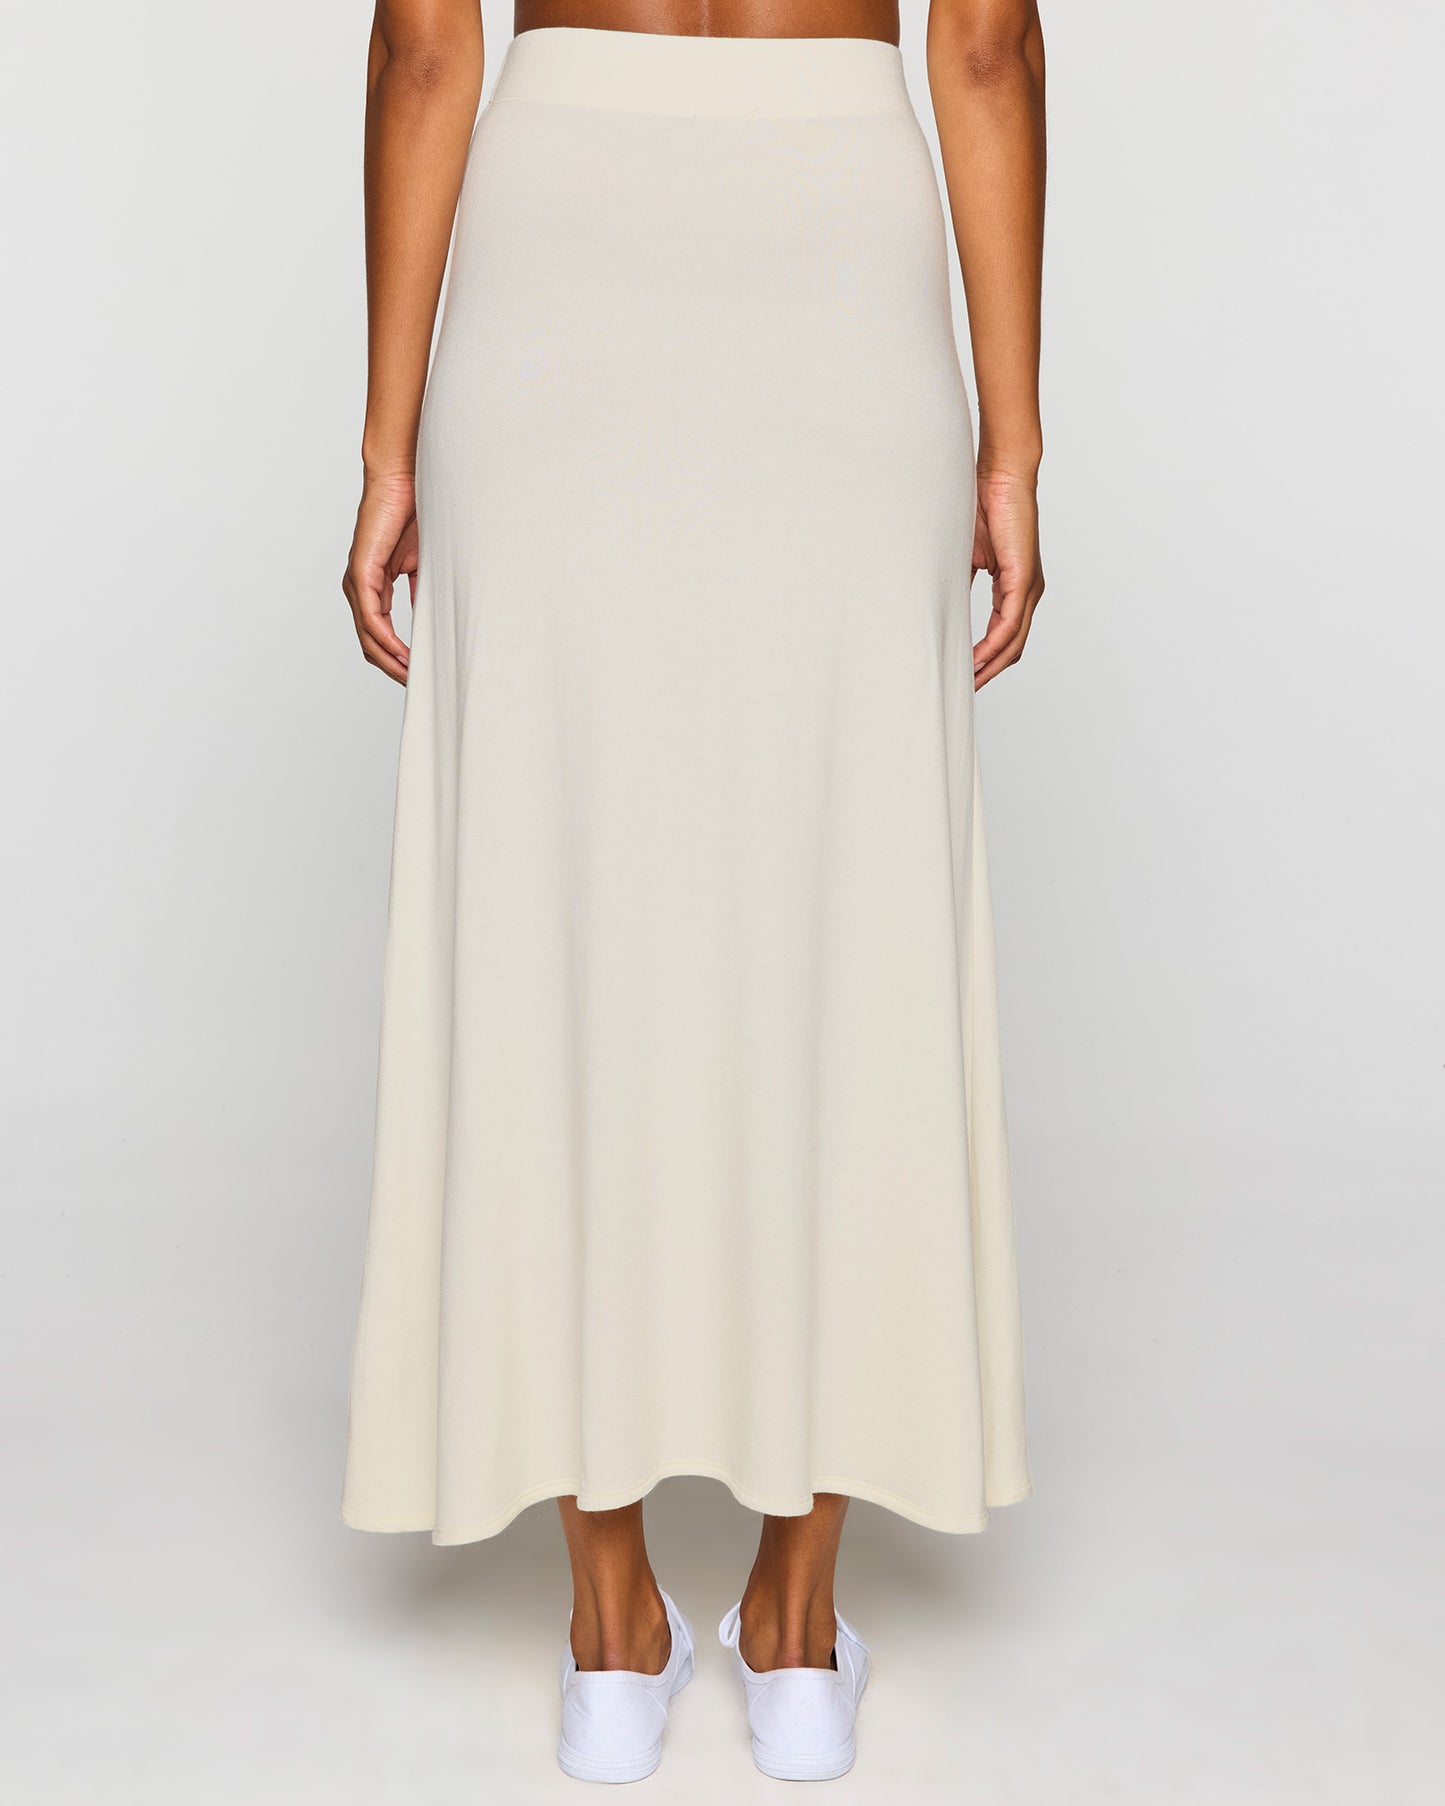 Stone | The Long A-Line Skirt Back